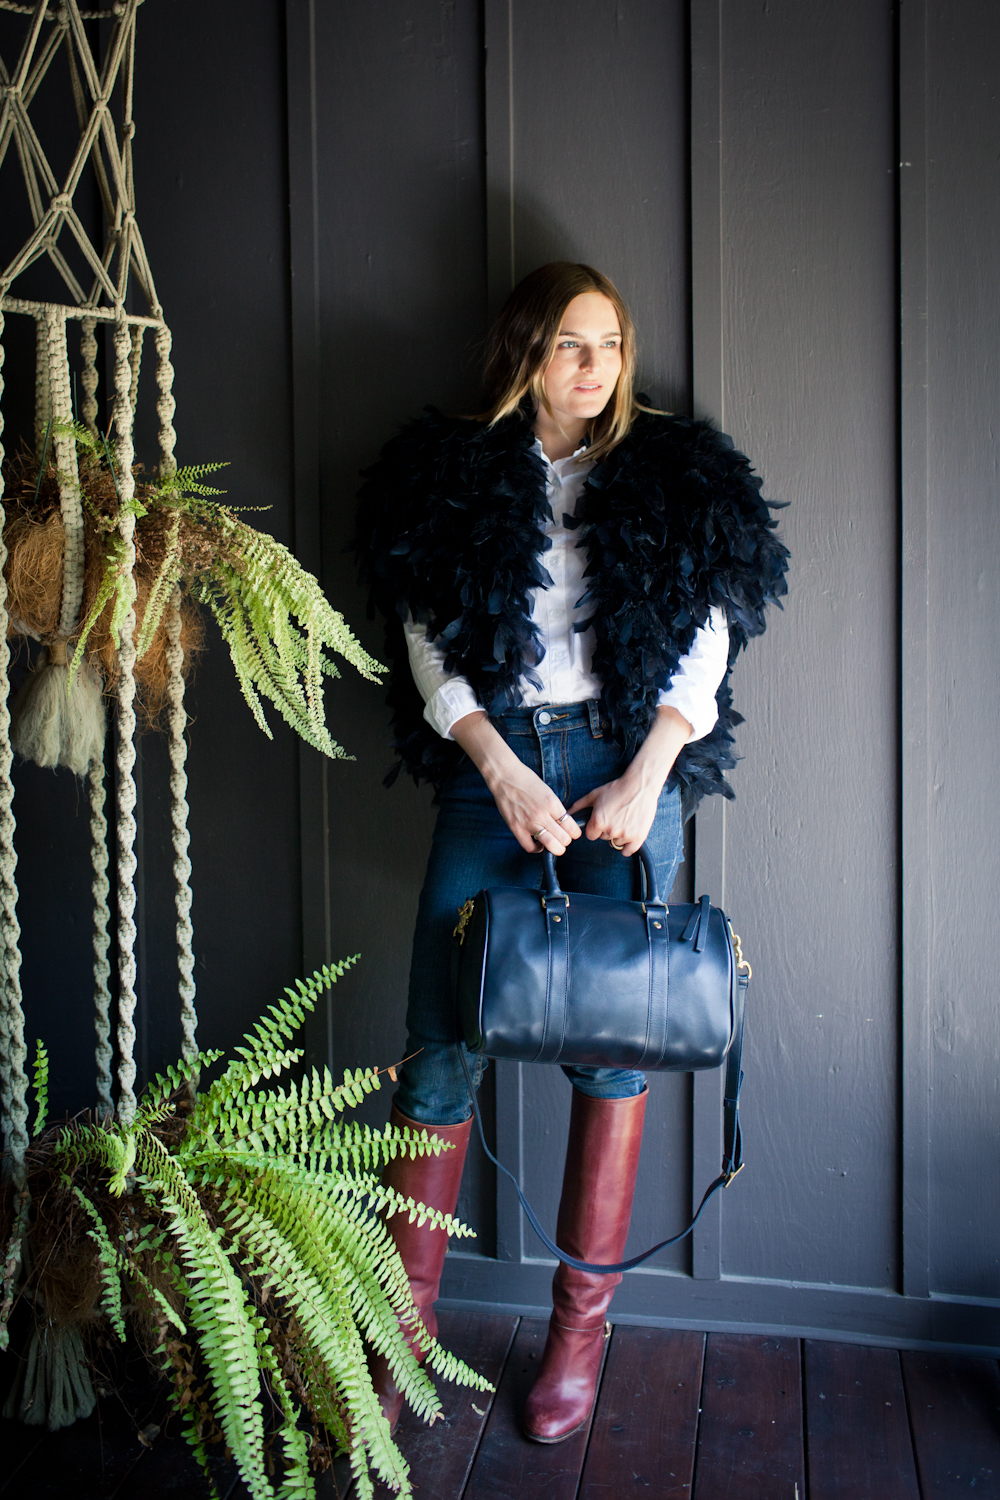 Handbag Designer Clare Vivier on the Time She “Almost Fainted